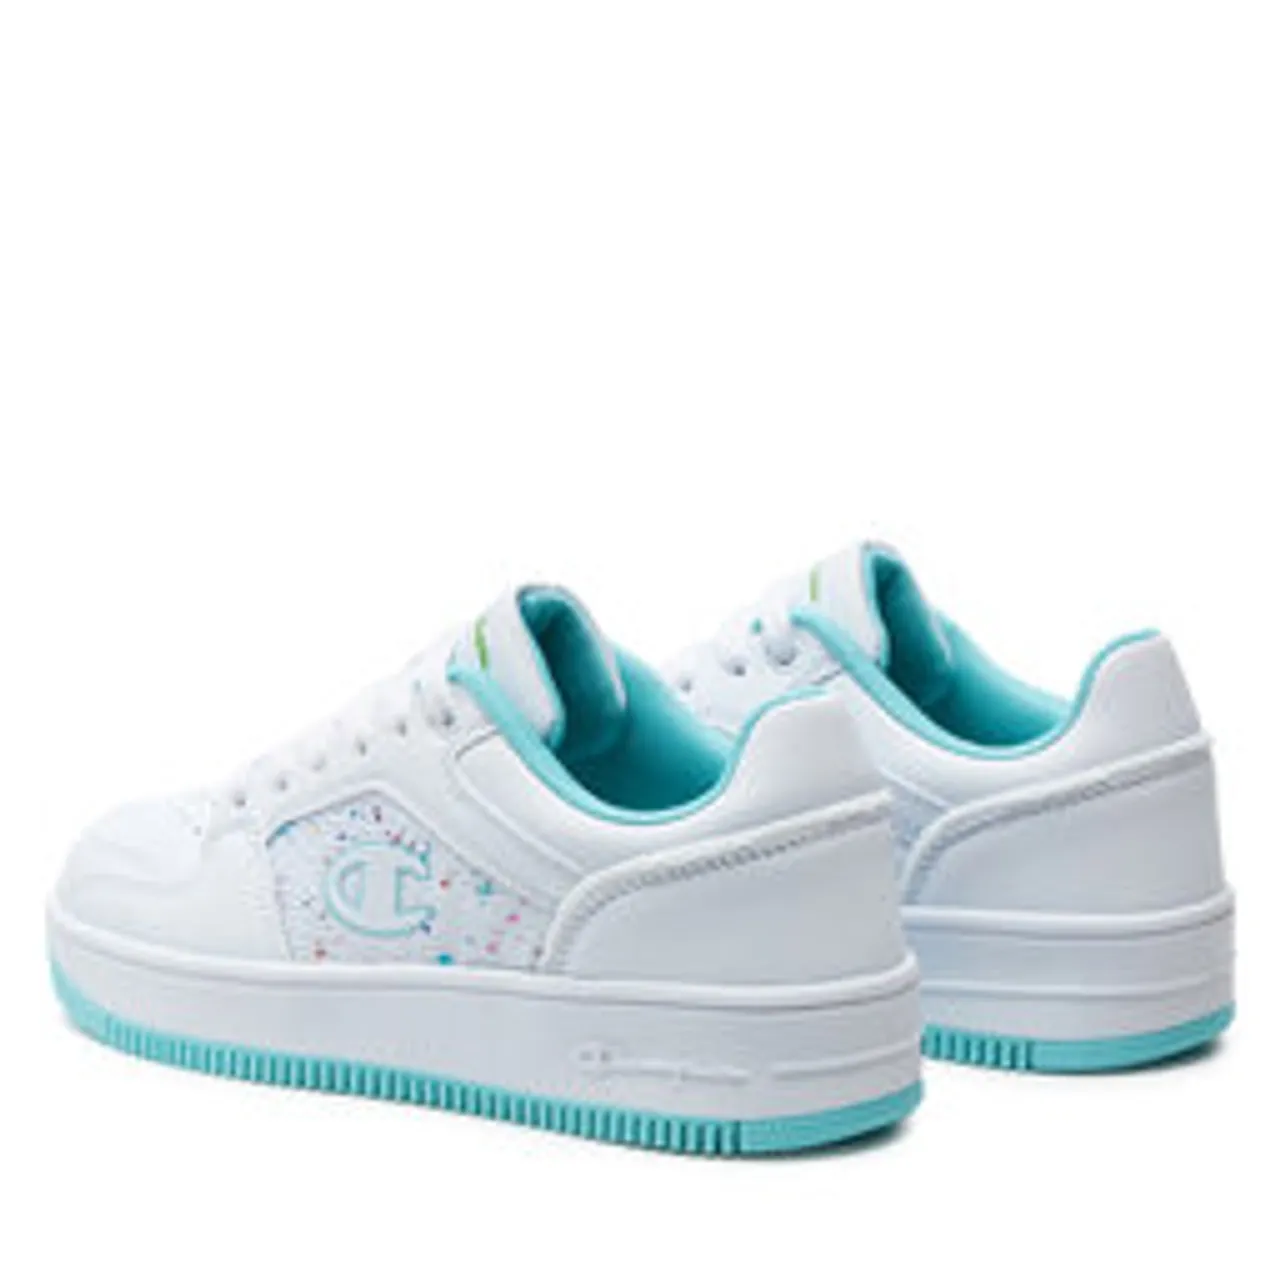 Sneakers Champion Rebound Platform Abstract G Ps S32873-CHA-WW011 Wht/Lt.Blue